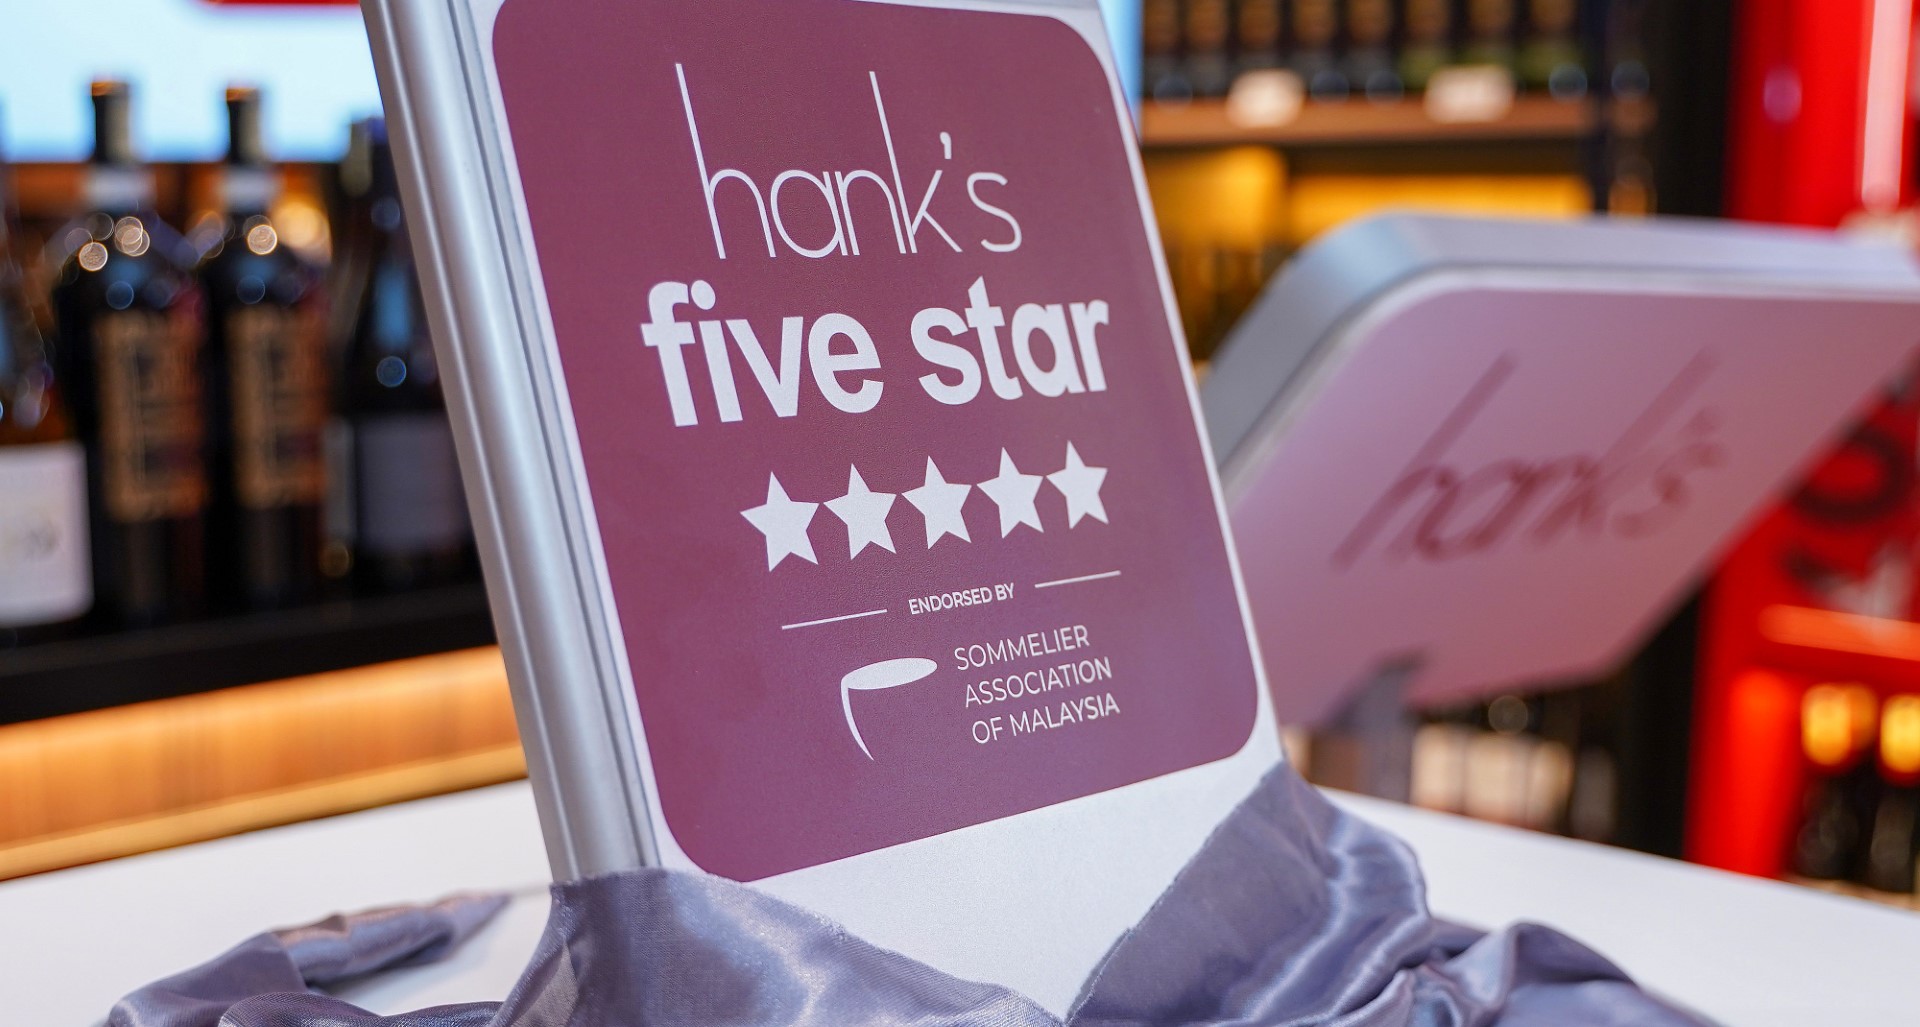 Hank's Five-Star Wines Launches in Collaboration with the Sommelier Association of Malaysia